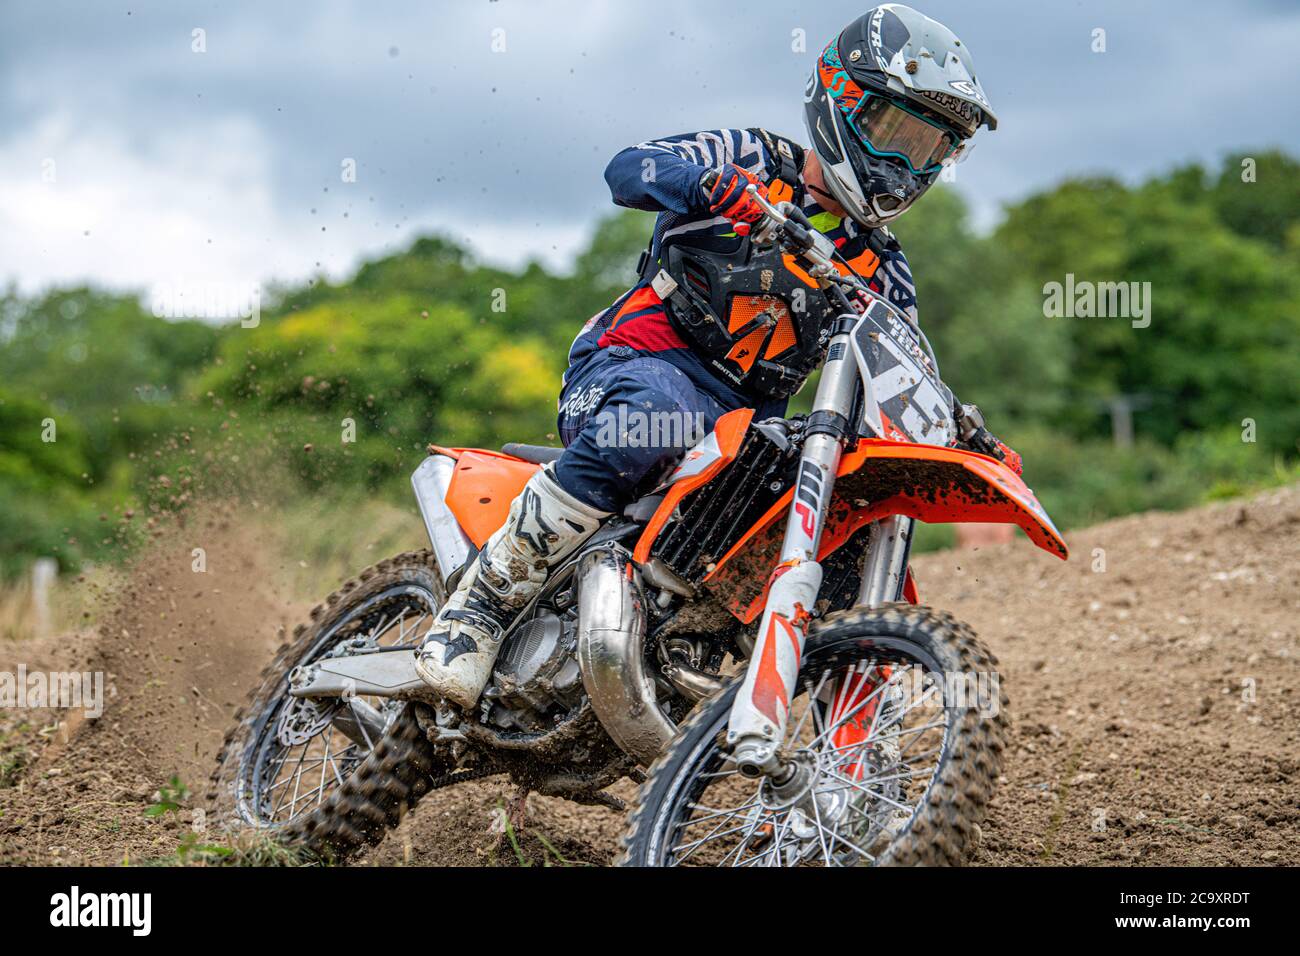 Motocross action from Foxhill mx track Swindon Wiltshire August 2020 Stock Photo